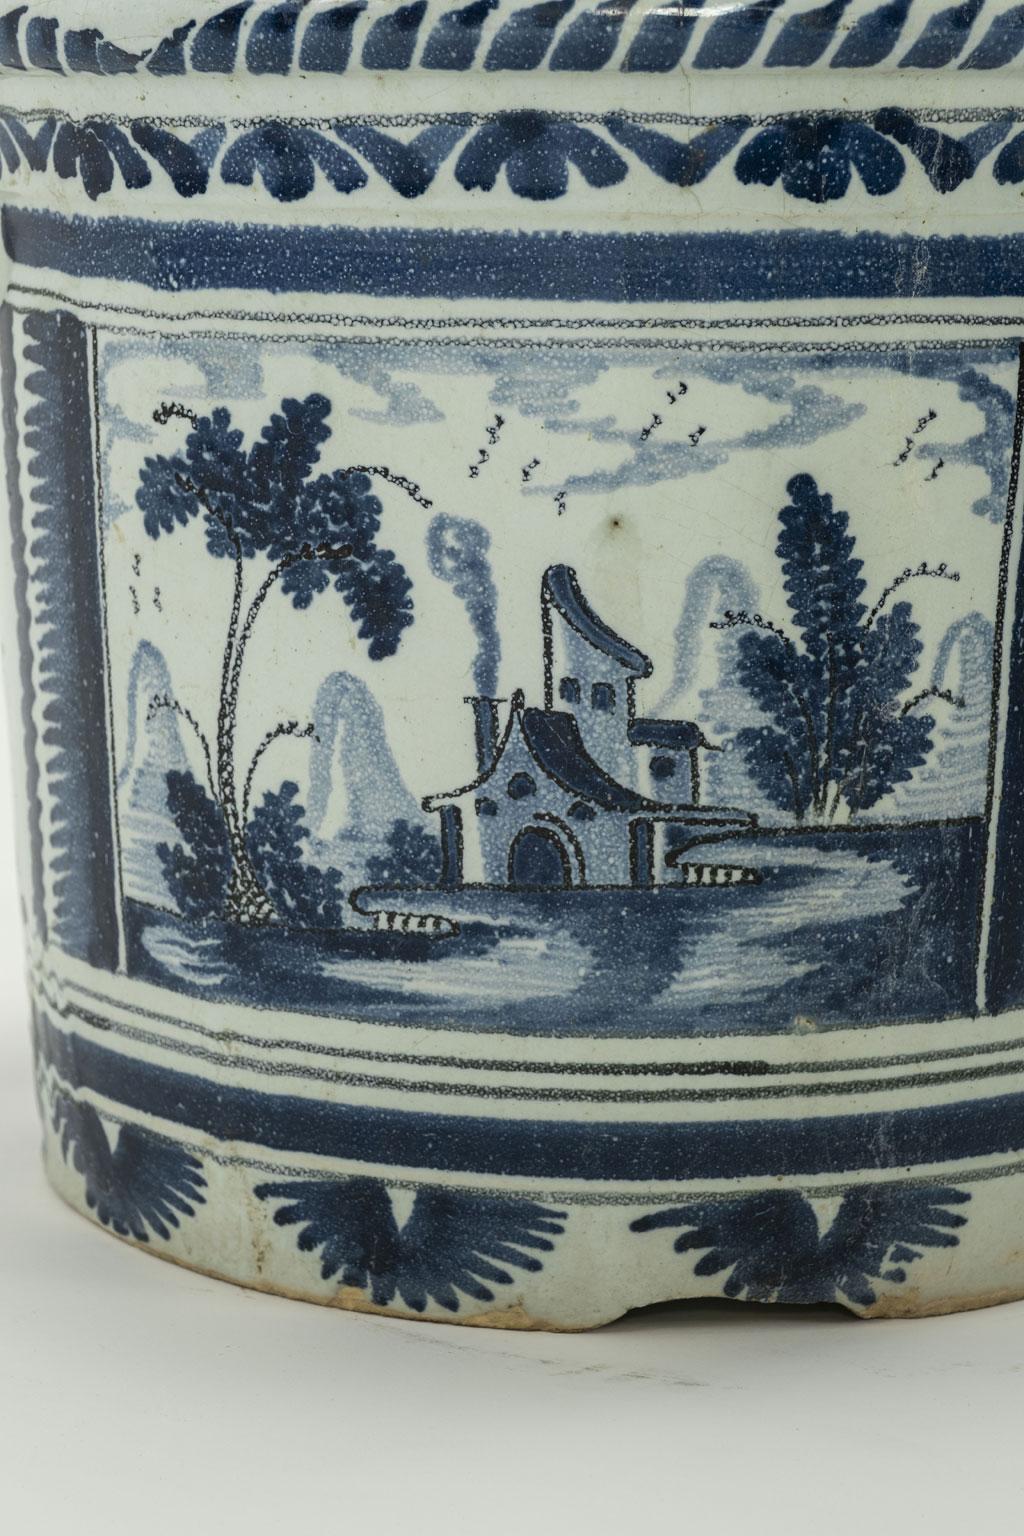 Nevers Faience 'Pot a Oranger' adorned with painted farmhouse scenes and scrolled decoration in shades of blue (camaieu bleu). This circa 1780-1800 tin-glazed planter comes from Nevers, France, an important site of faience production in the 18th